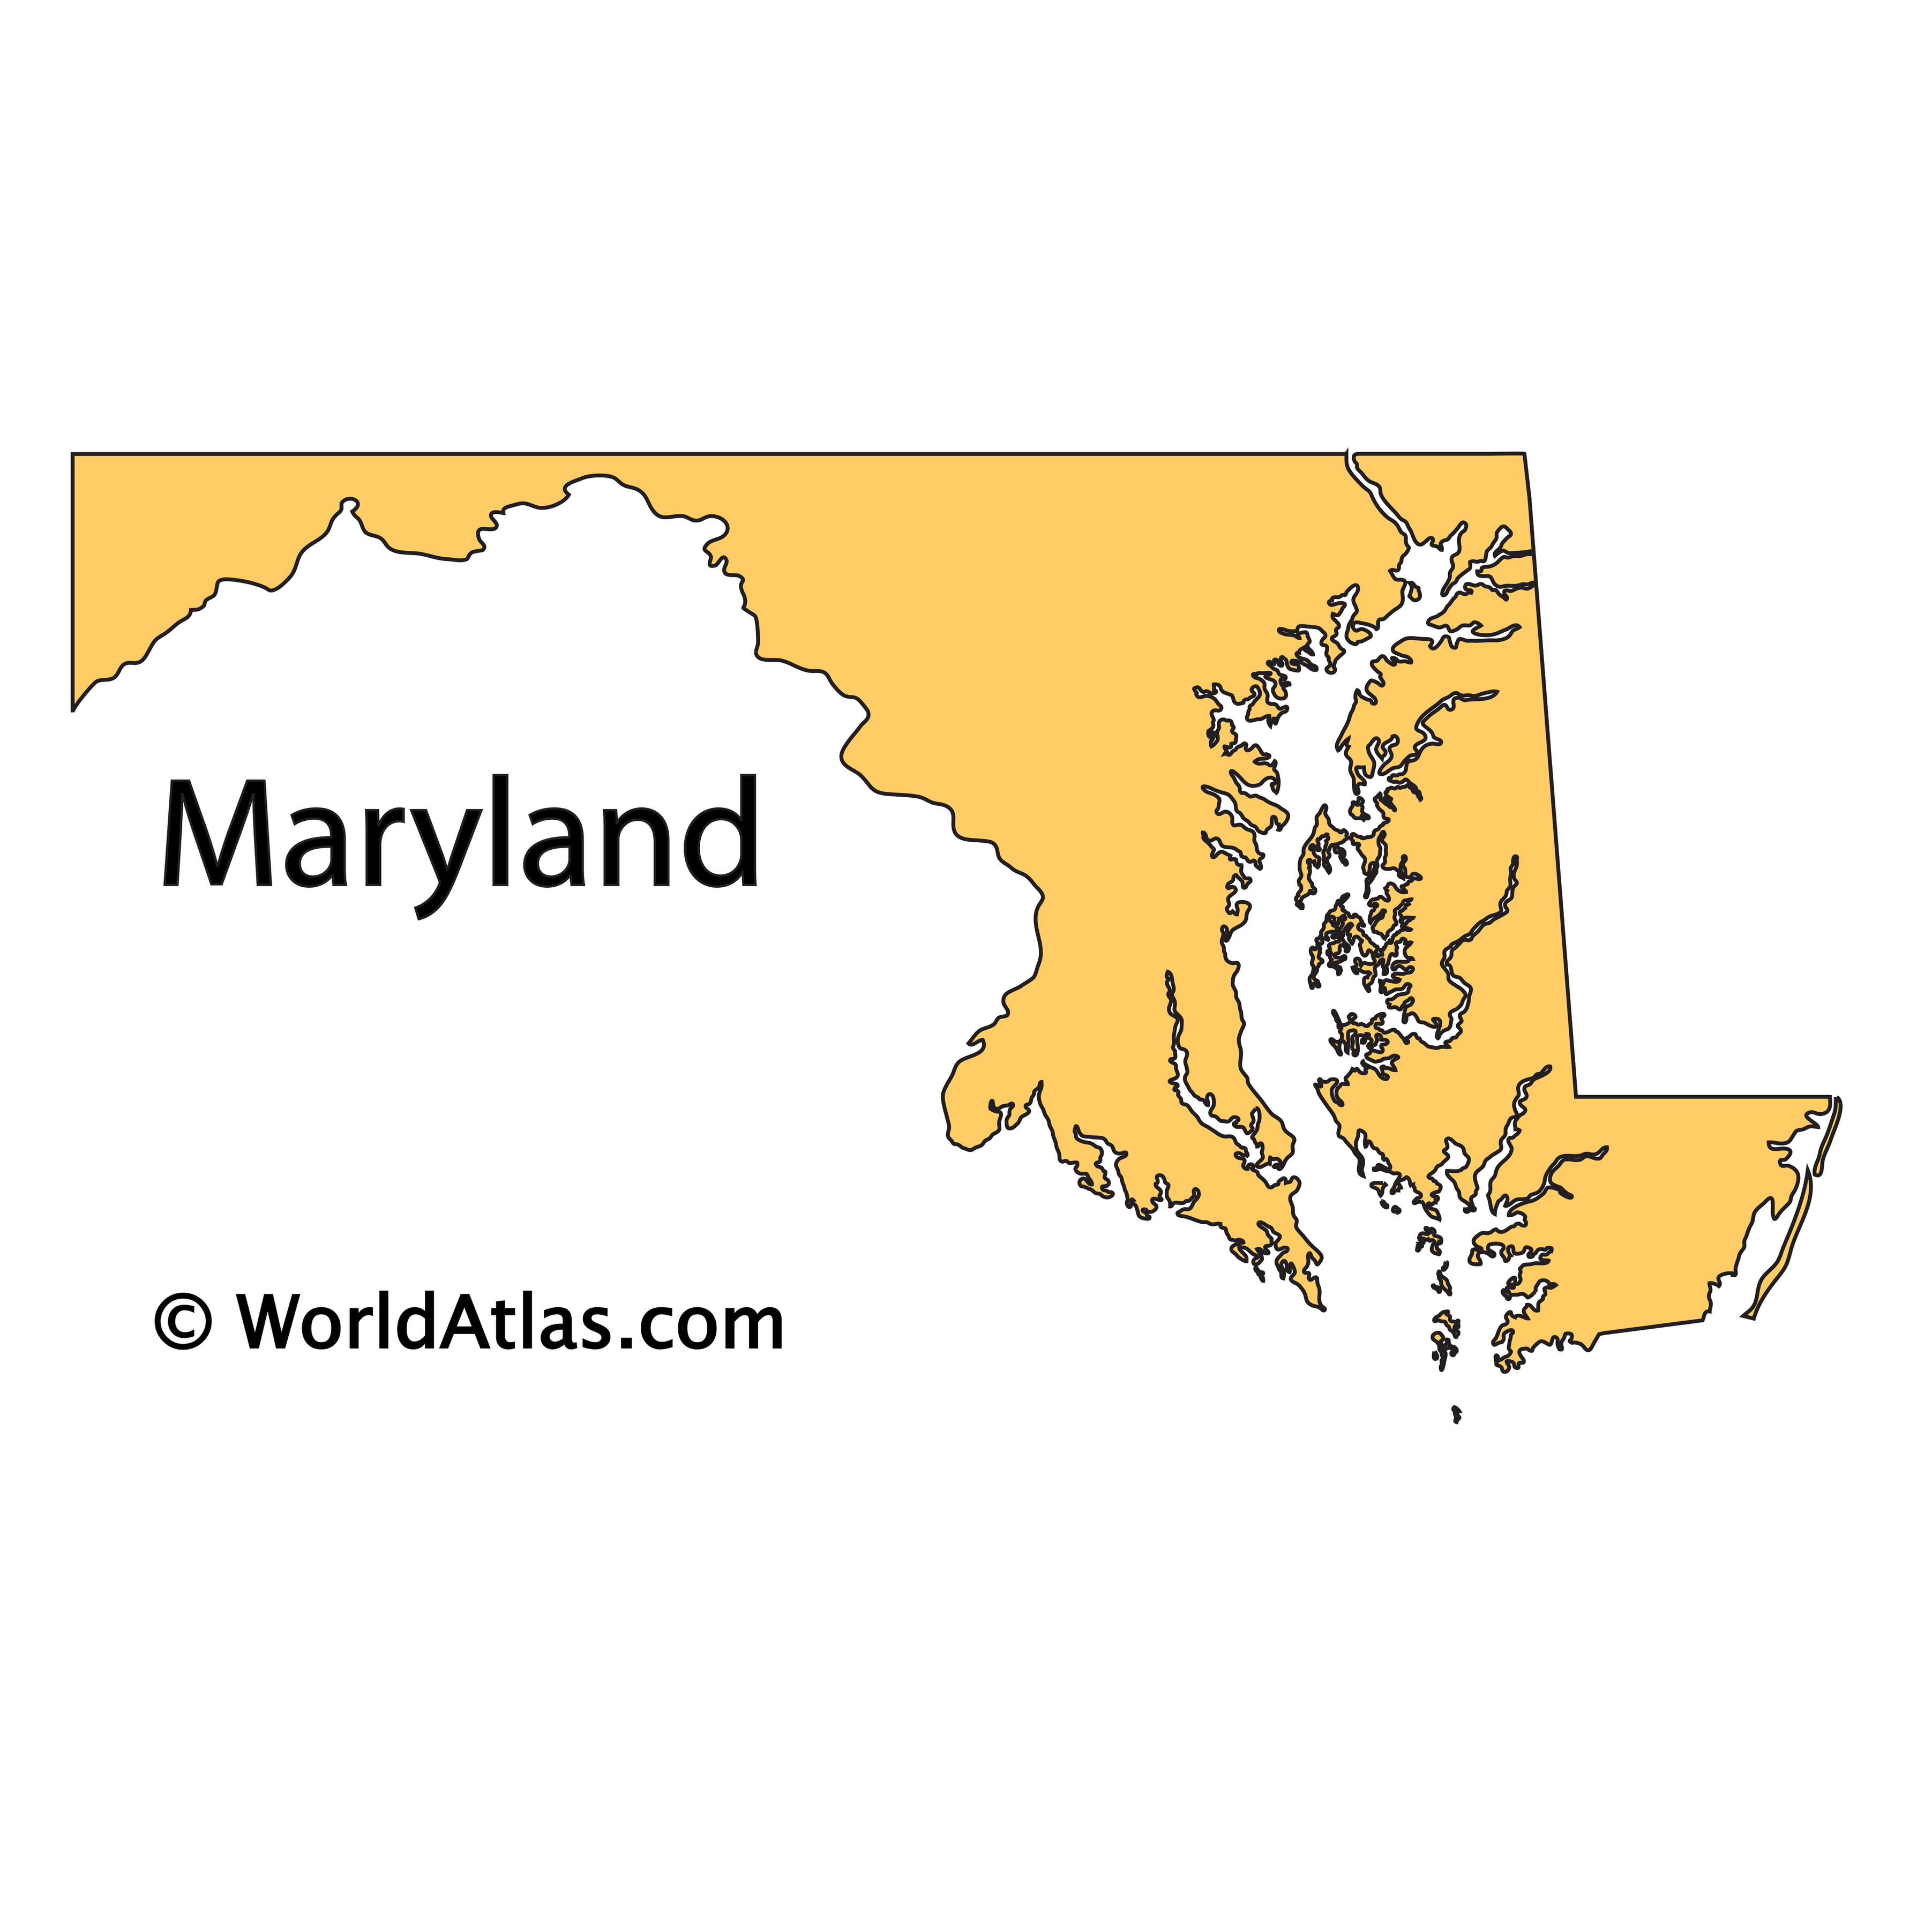 Large Detailed Tourist Illustrated Map Of Maryland State Images And Images